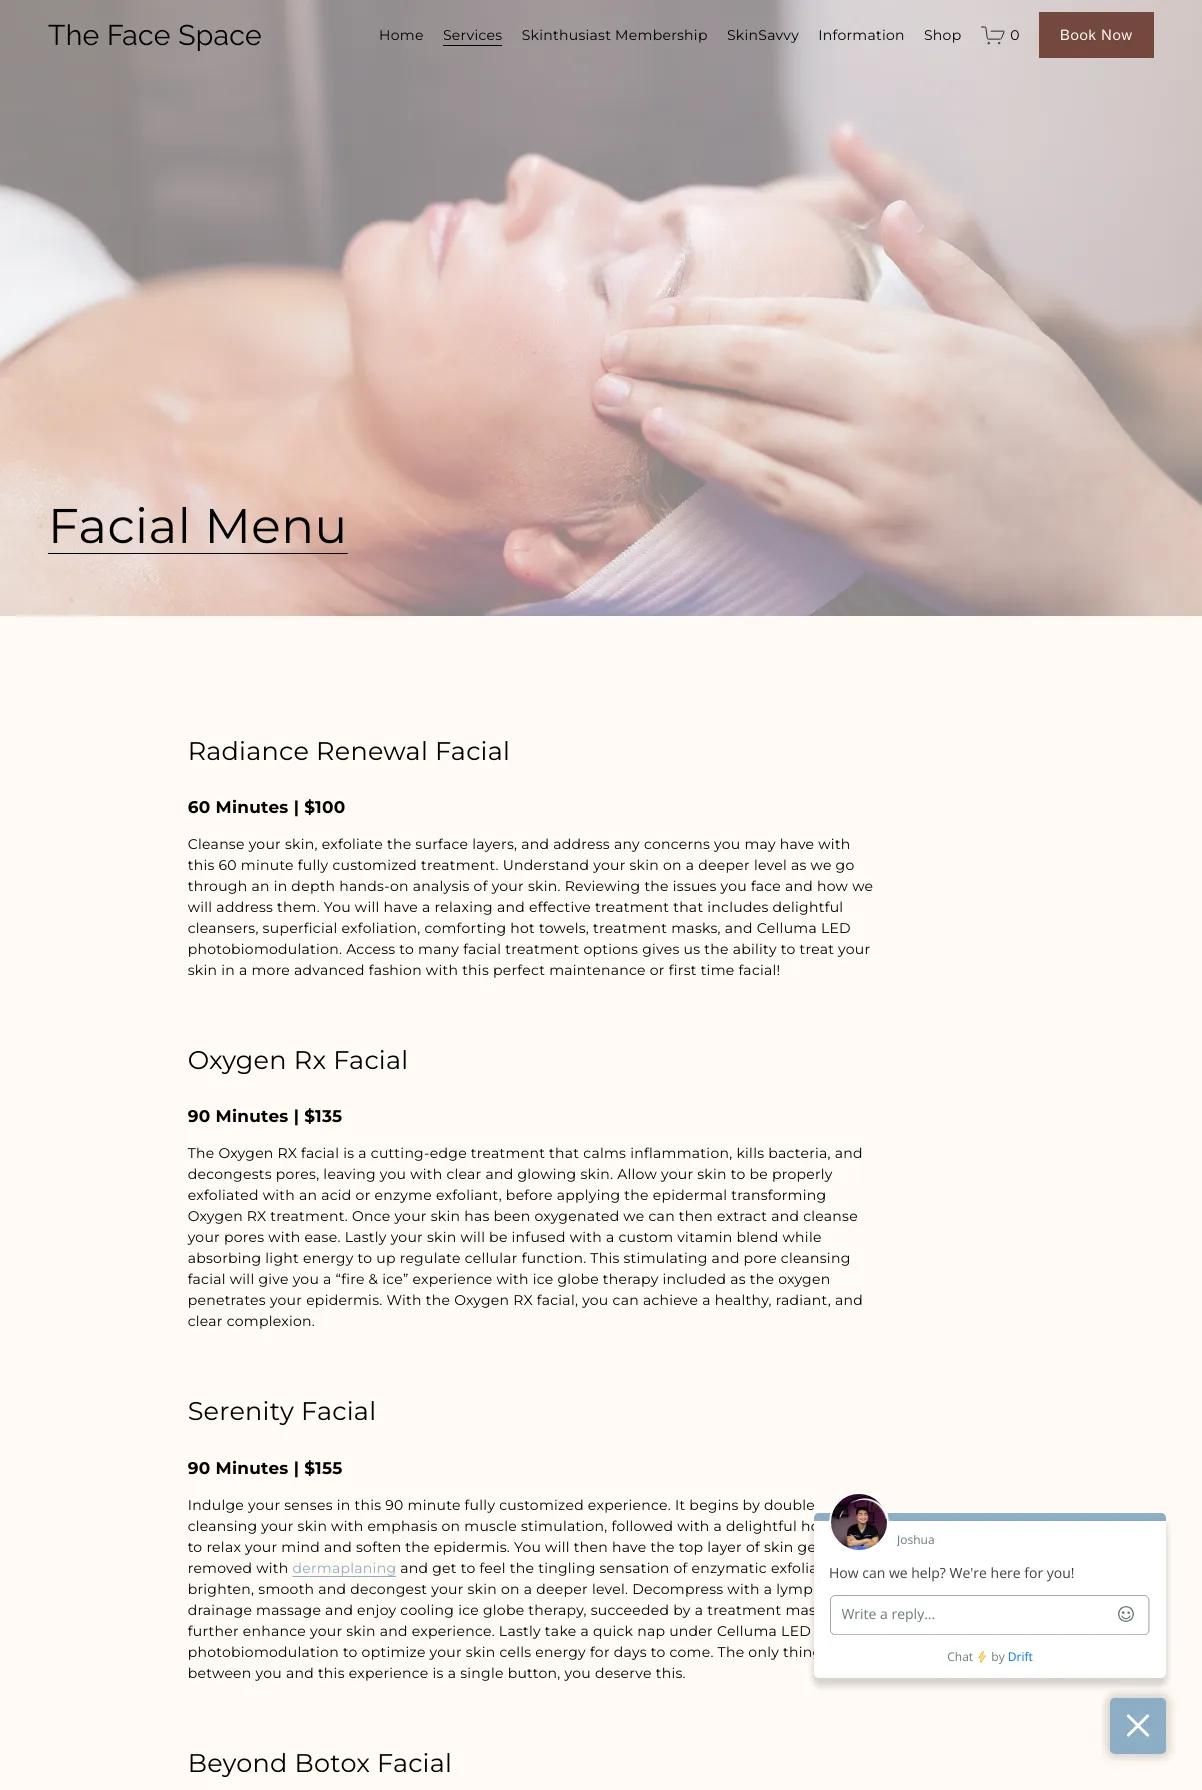 Screenshot 2 of The Face Space (Example Squarespace Esthetician Website)